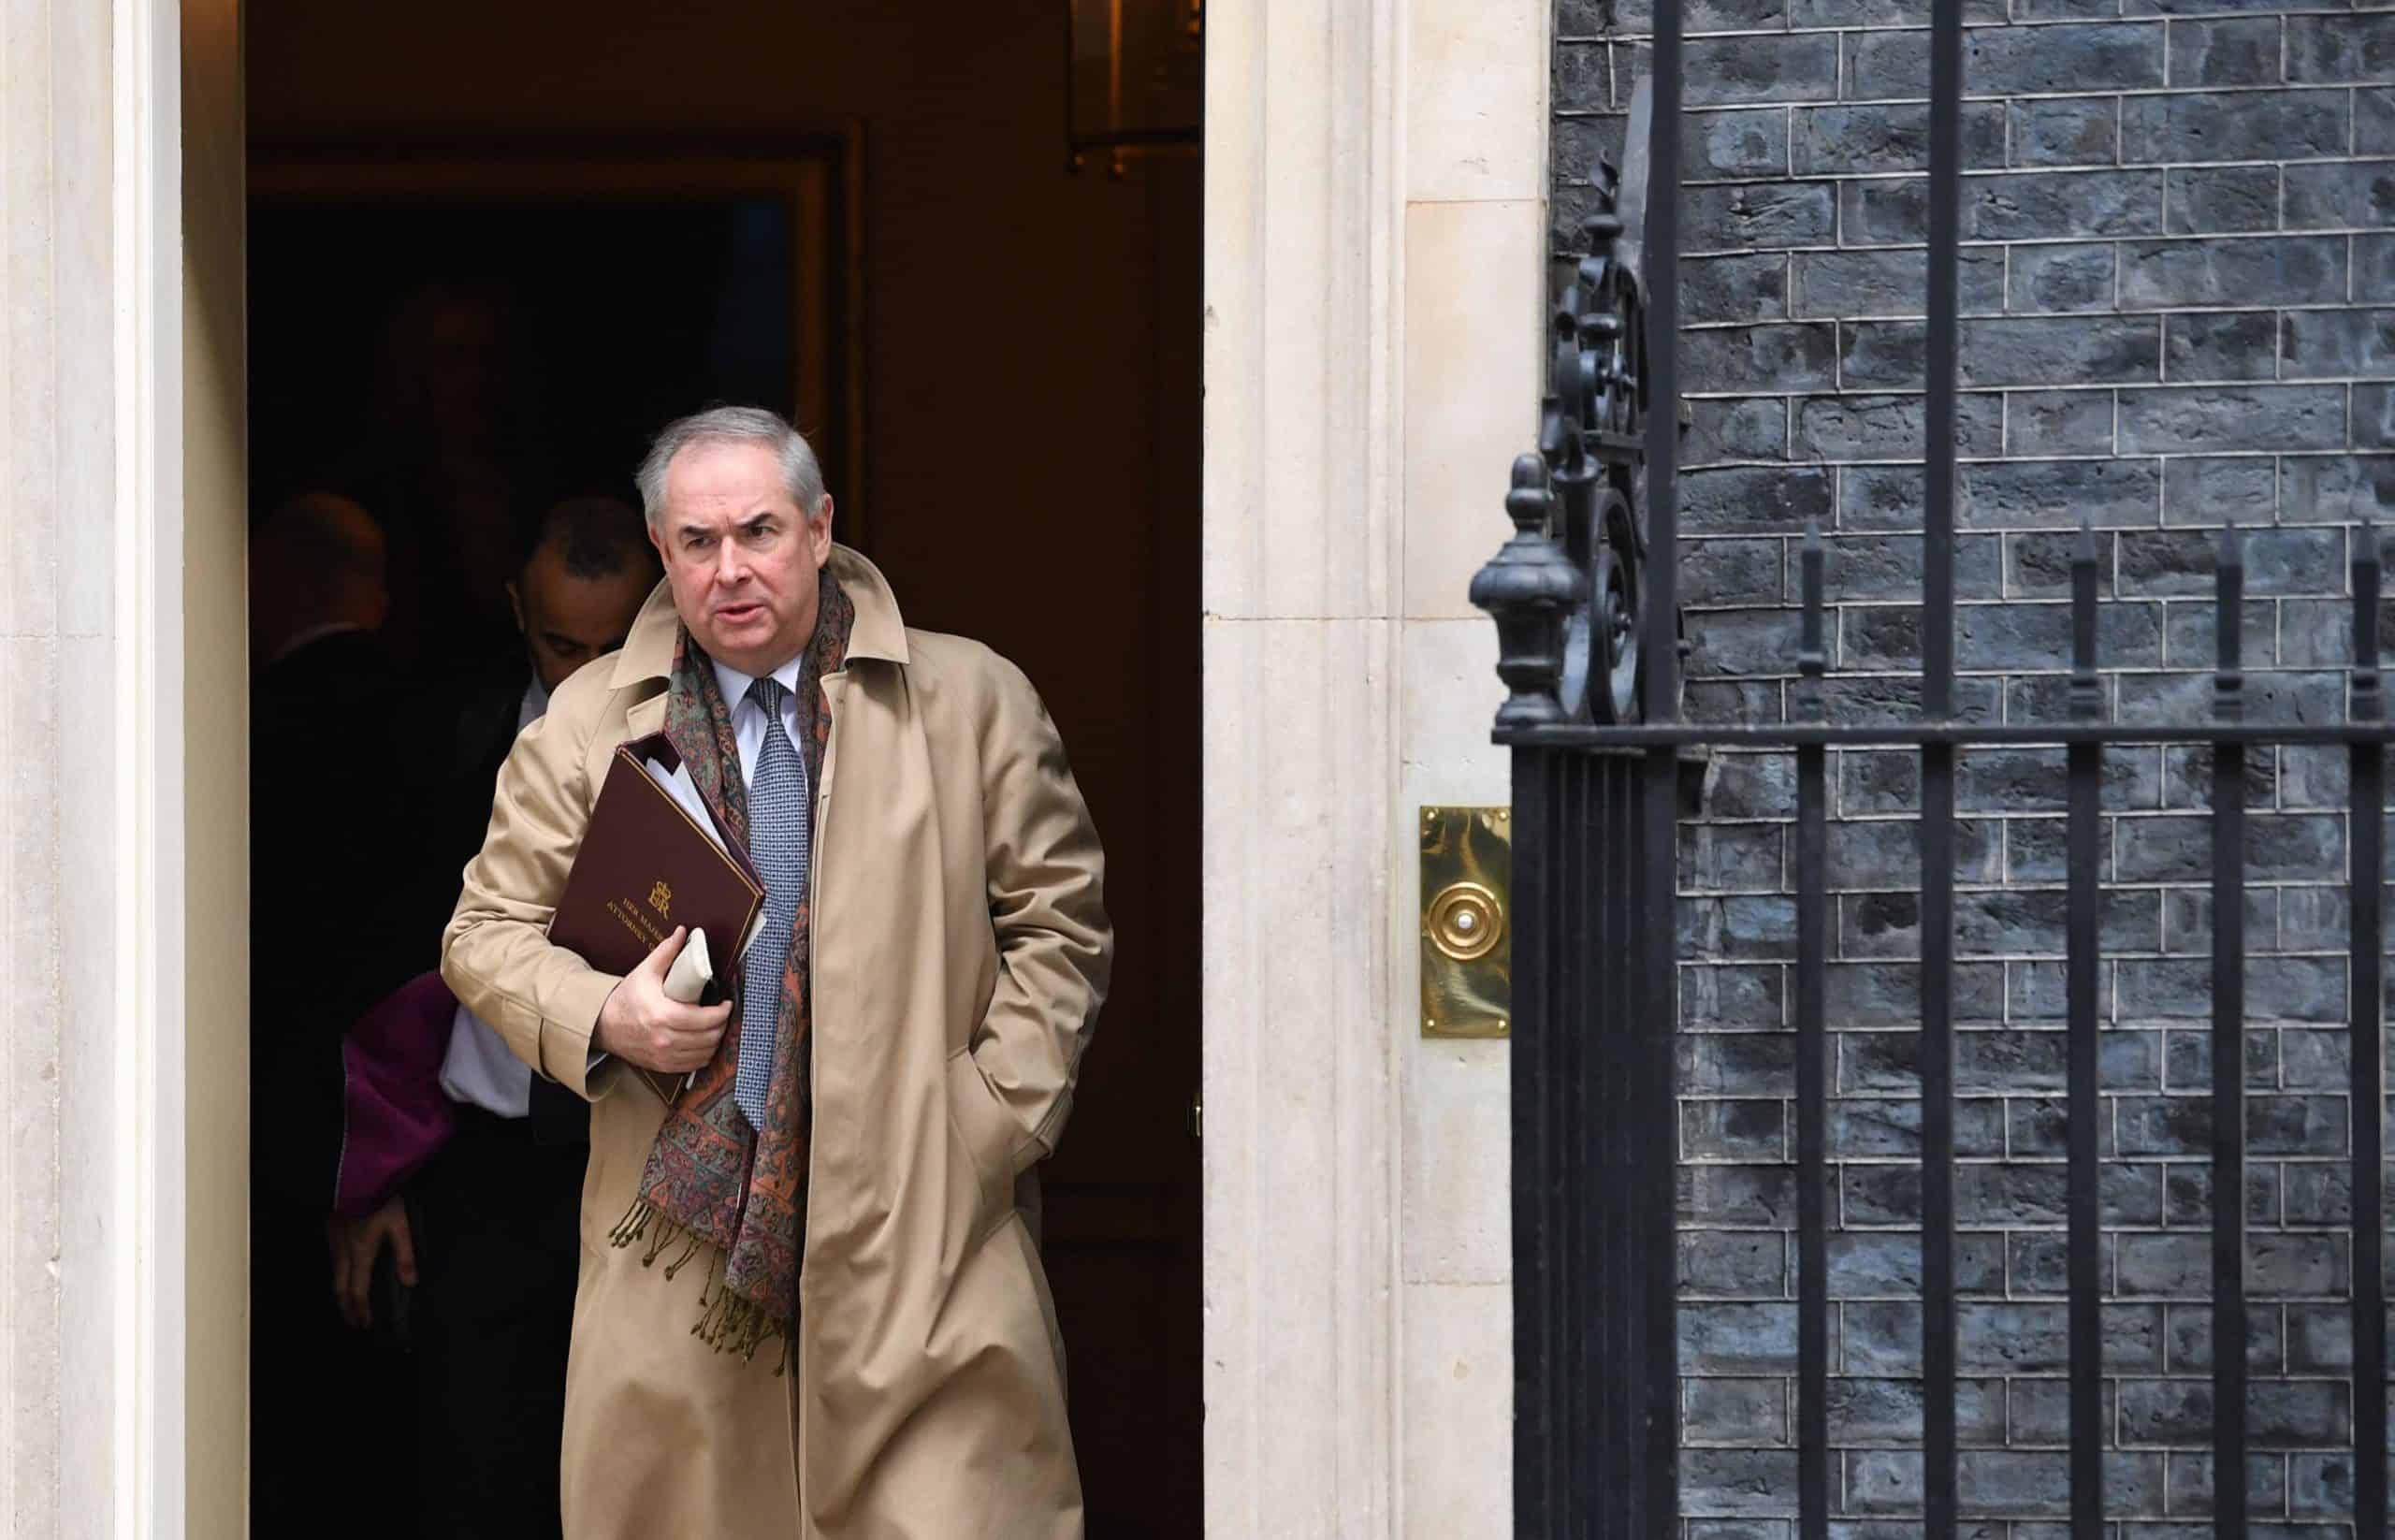 Caught red-handed: Geoffrey Cox dobbed in by division bell